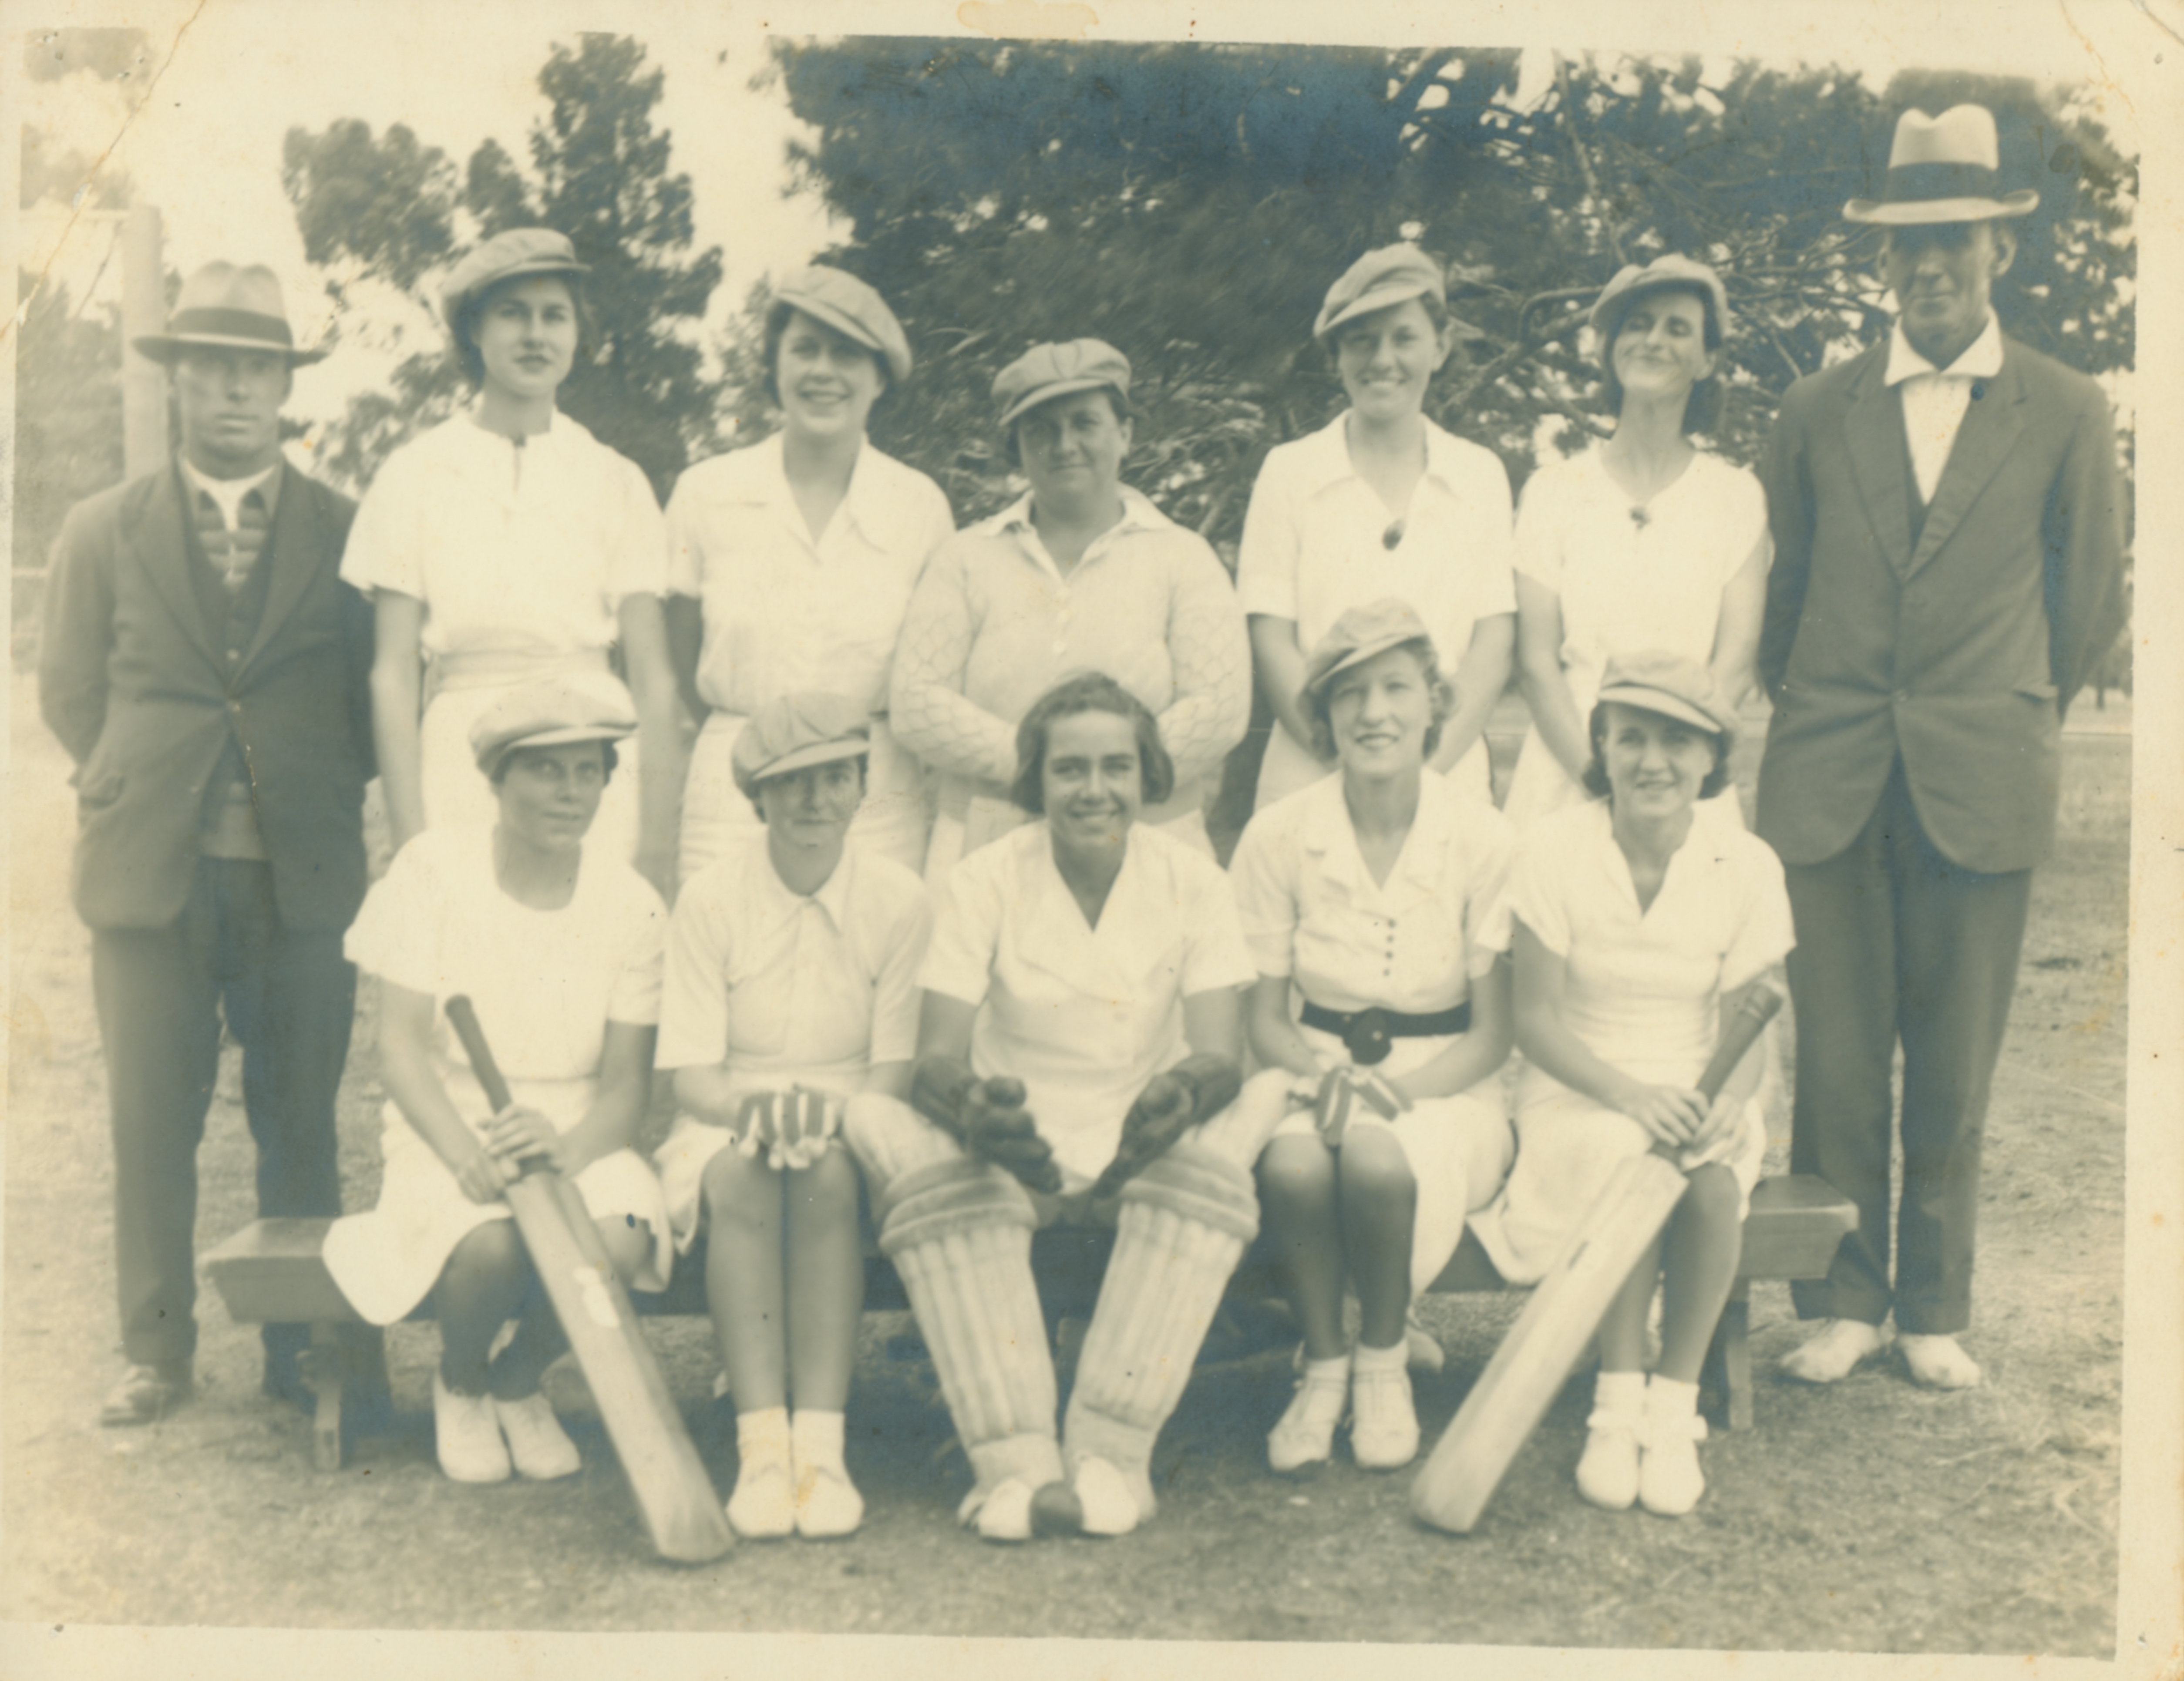 “Young Women’s Christian Association Cricket Team, 1938”, 1948.0066, Unit 45, 1984.0066.00031 and verso with names of players and coaches.